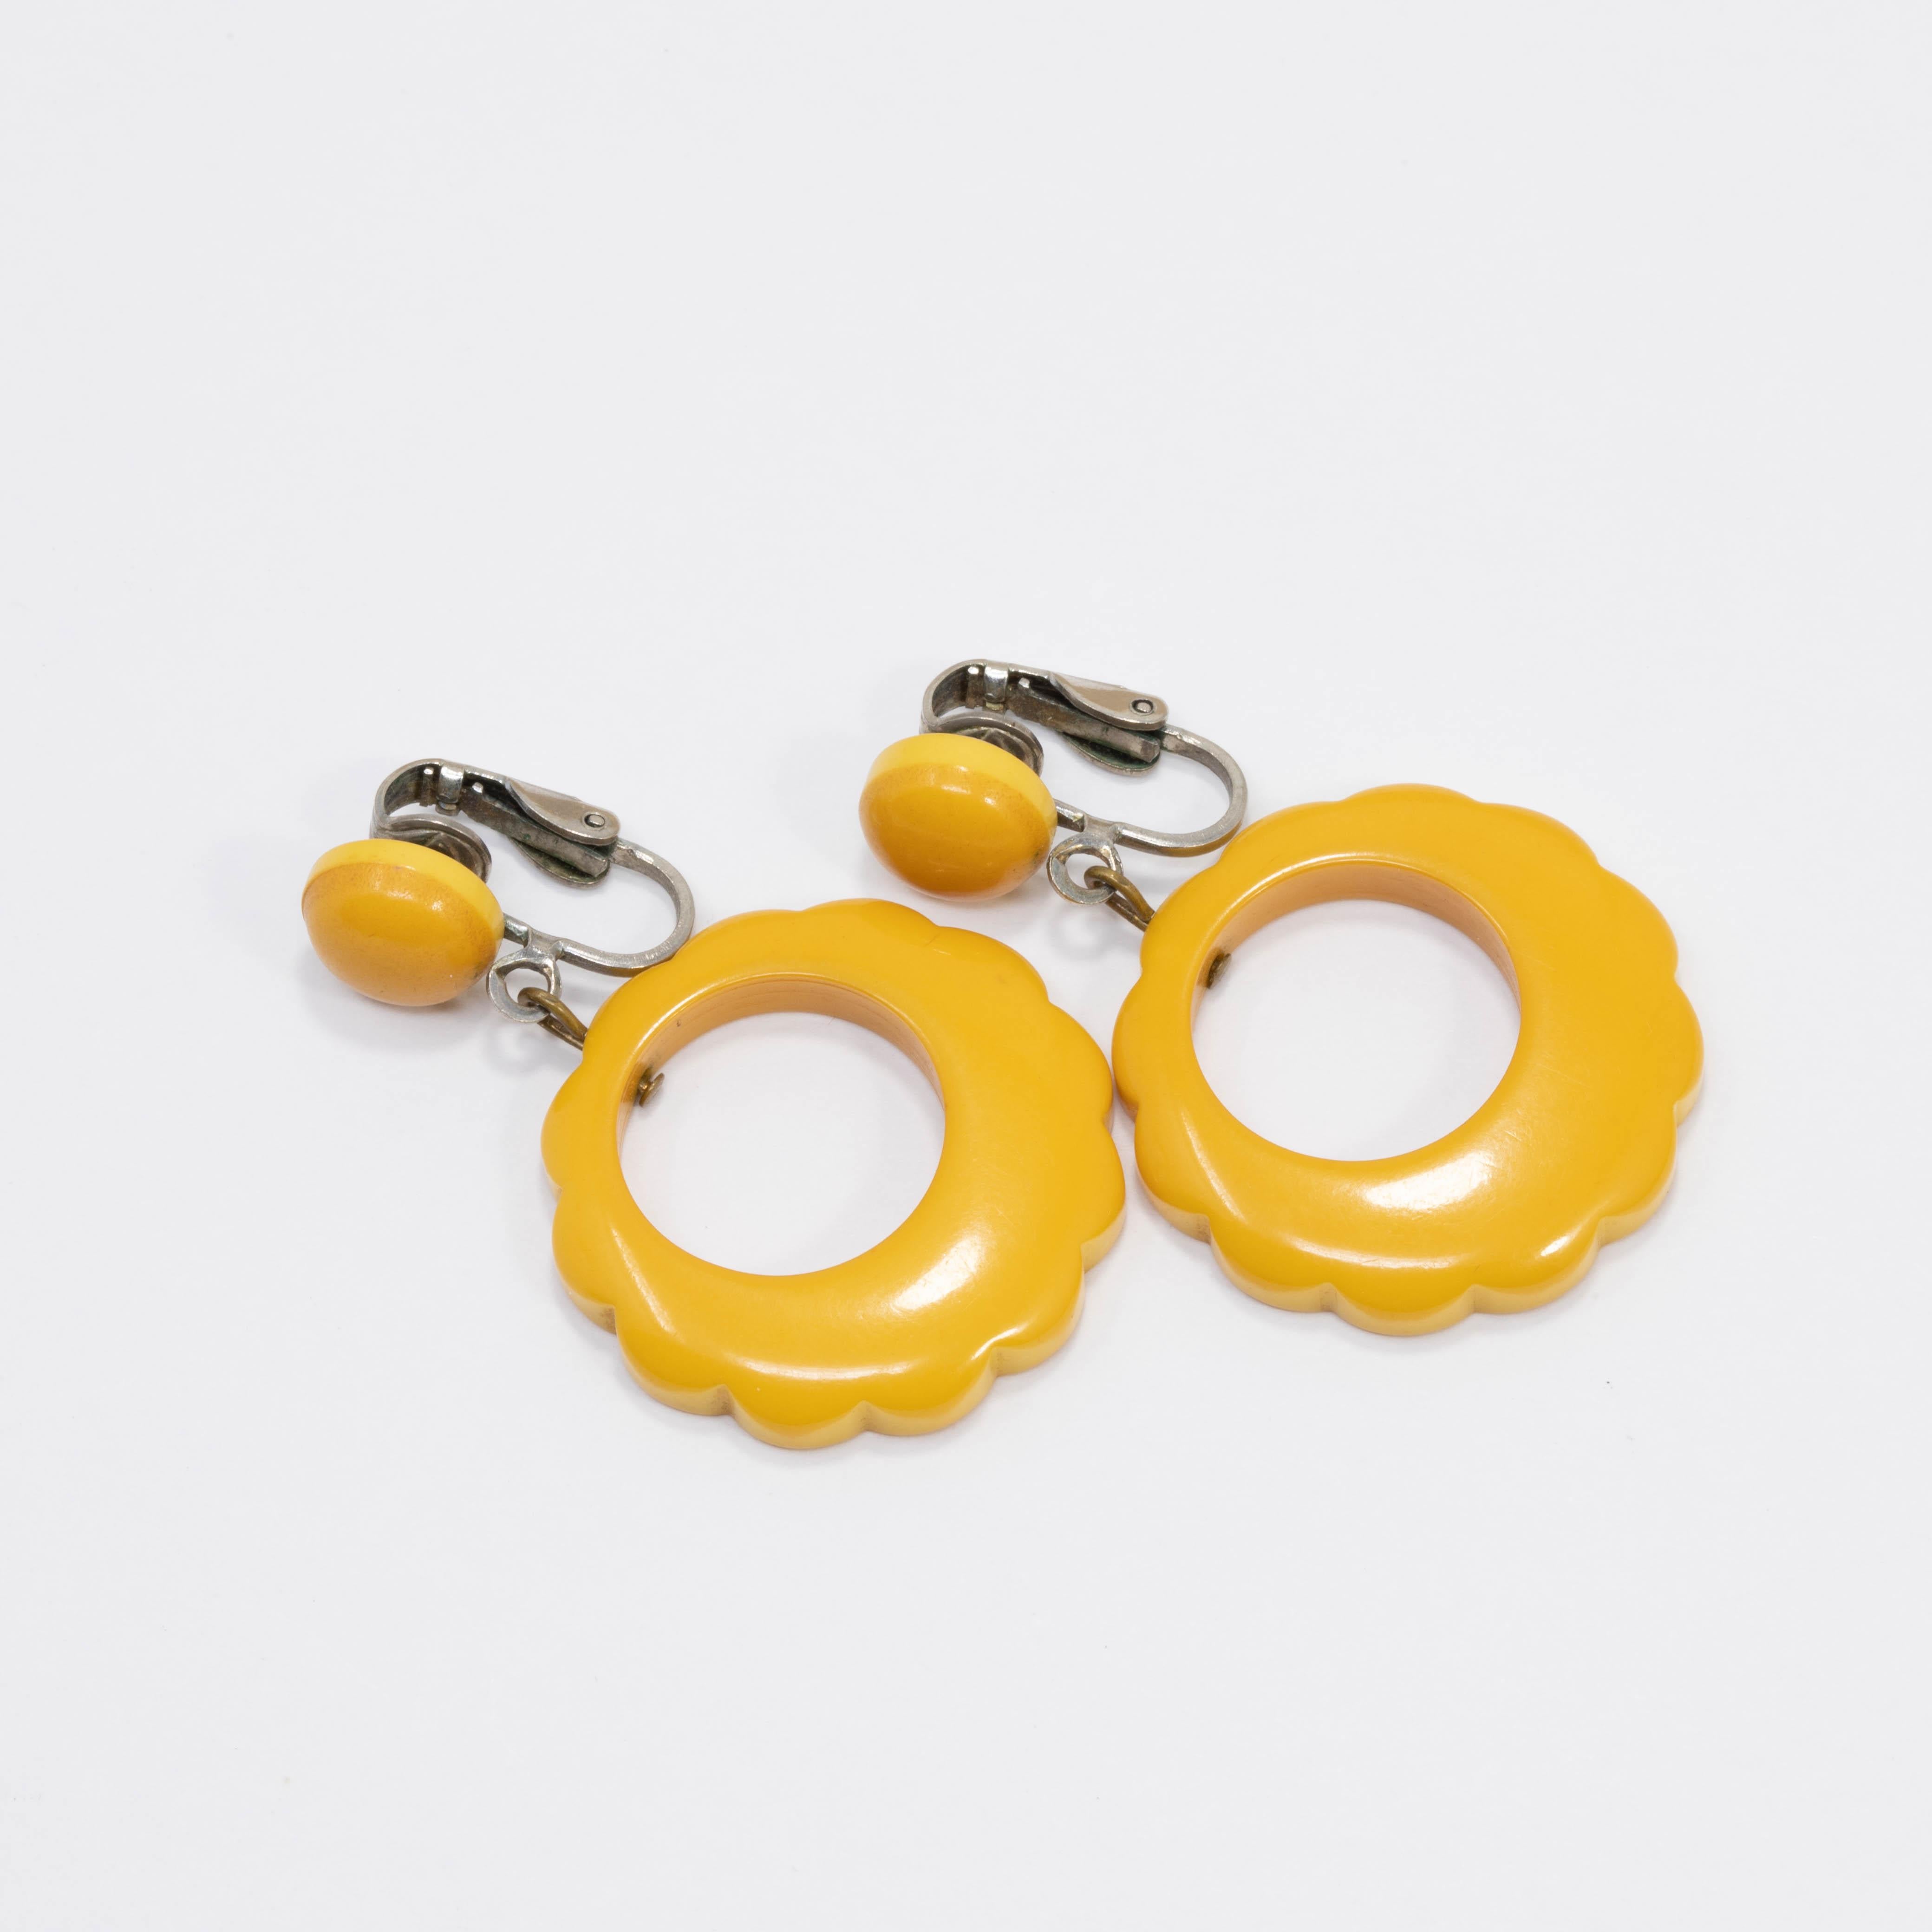 Spectacular pair of bakelite earrings! Bright butterscotch yellow bakelite accents hang off of studded silver-tone clip ons.

